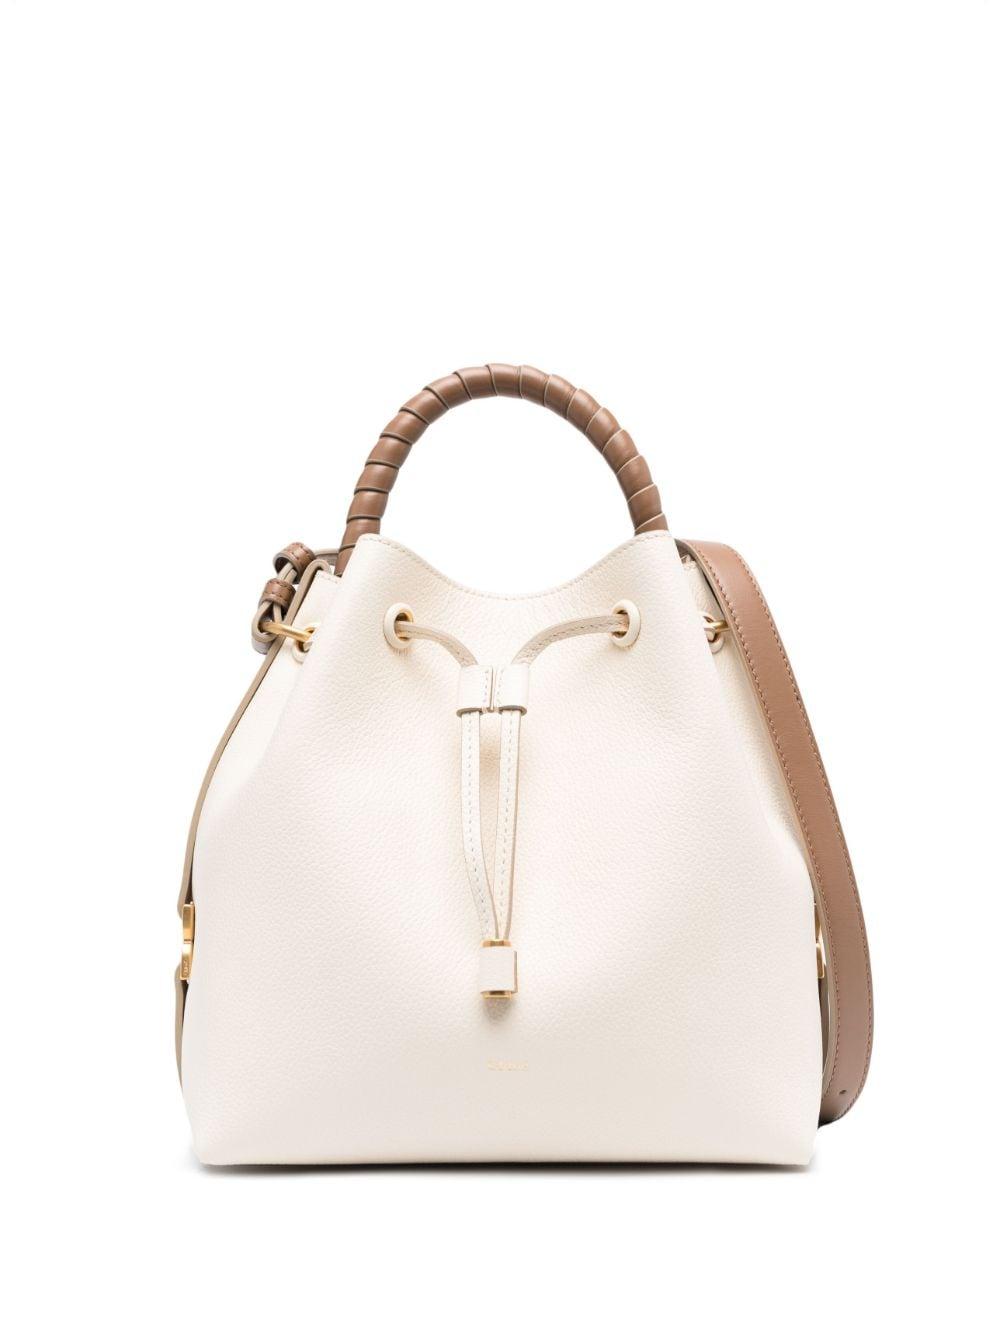 Chloé Marcie Leather Bucket Bag in Natural | Lyst